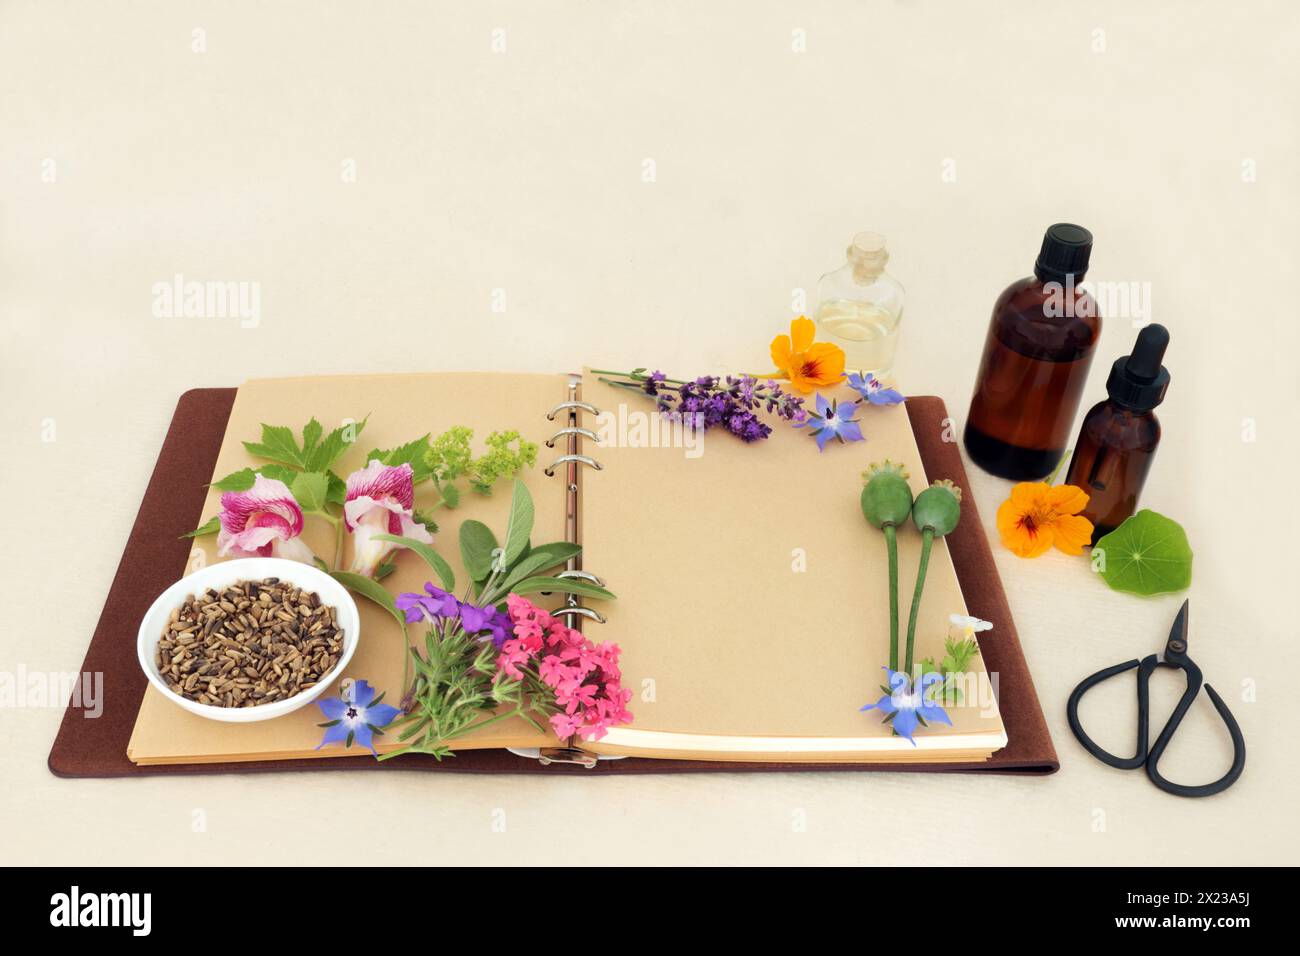 Herbal medicine preparation with flowers and herbs for natural aromatherapy treatments. Ingredients for alternative remedies with recipe notebook. Stock Photo